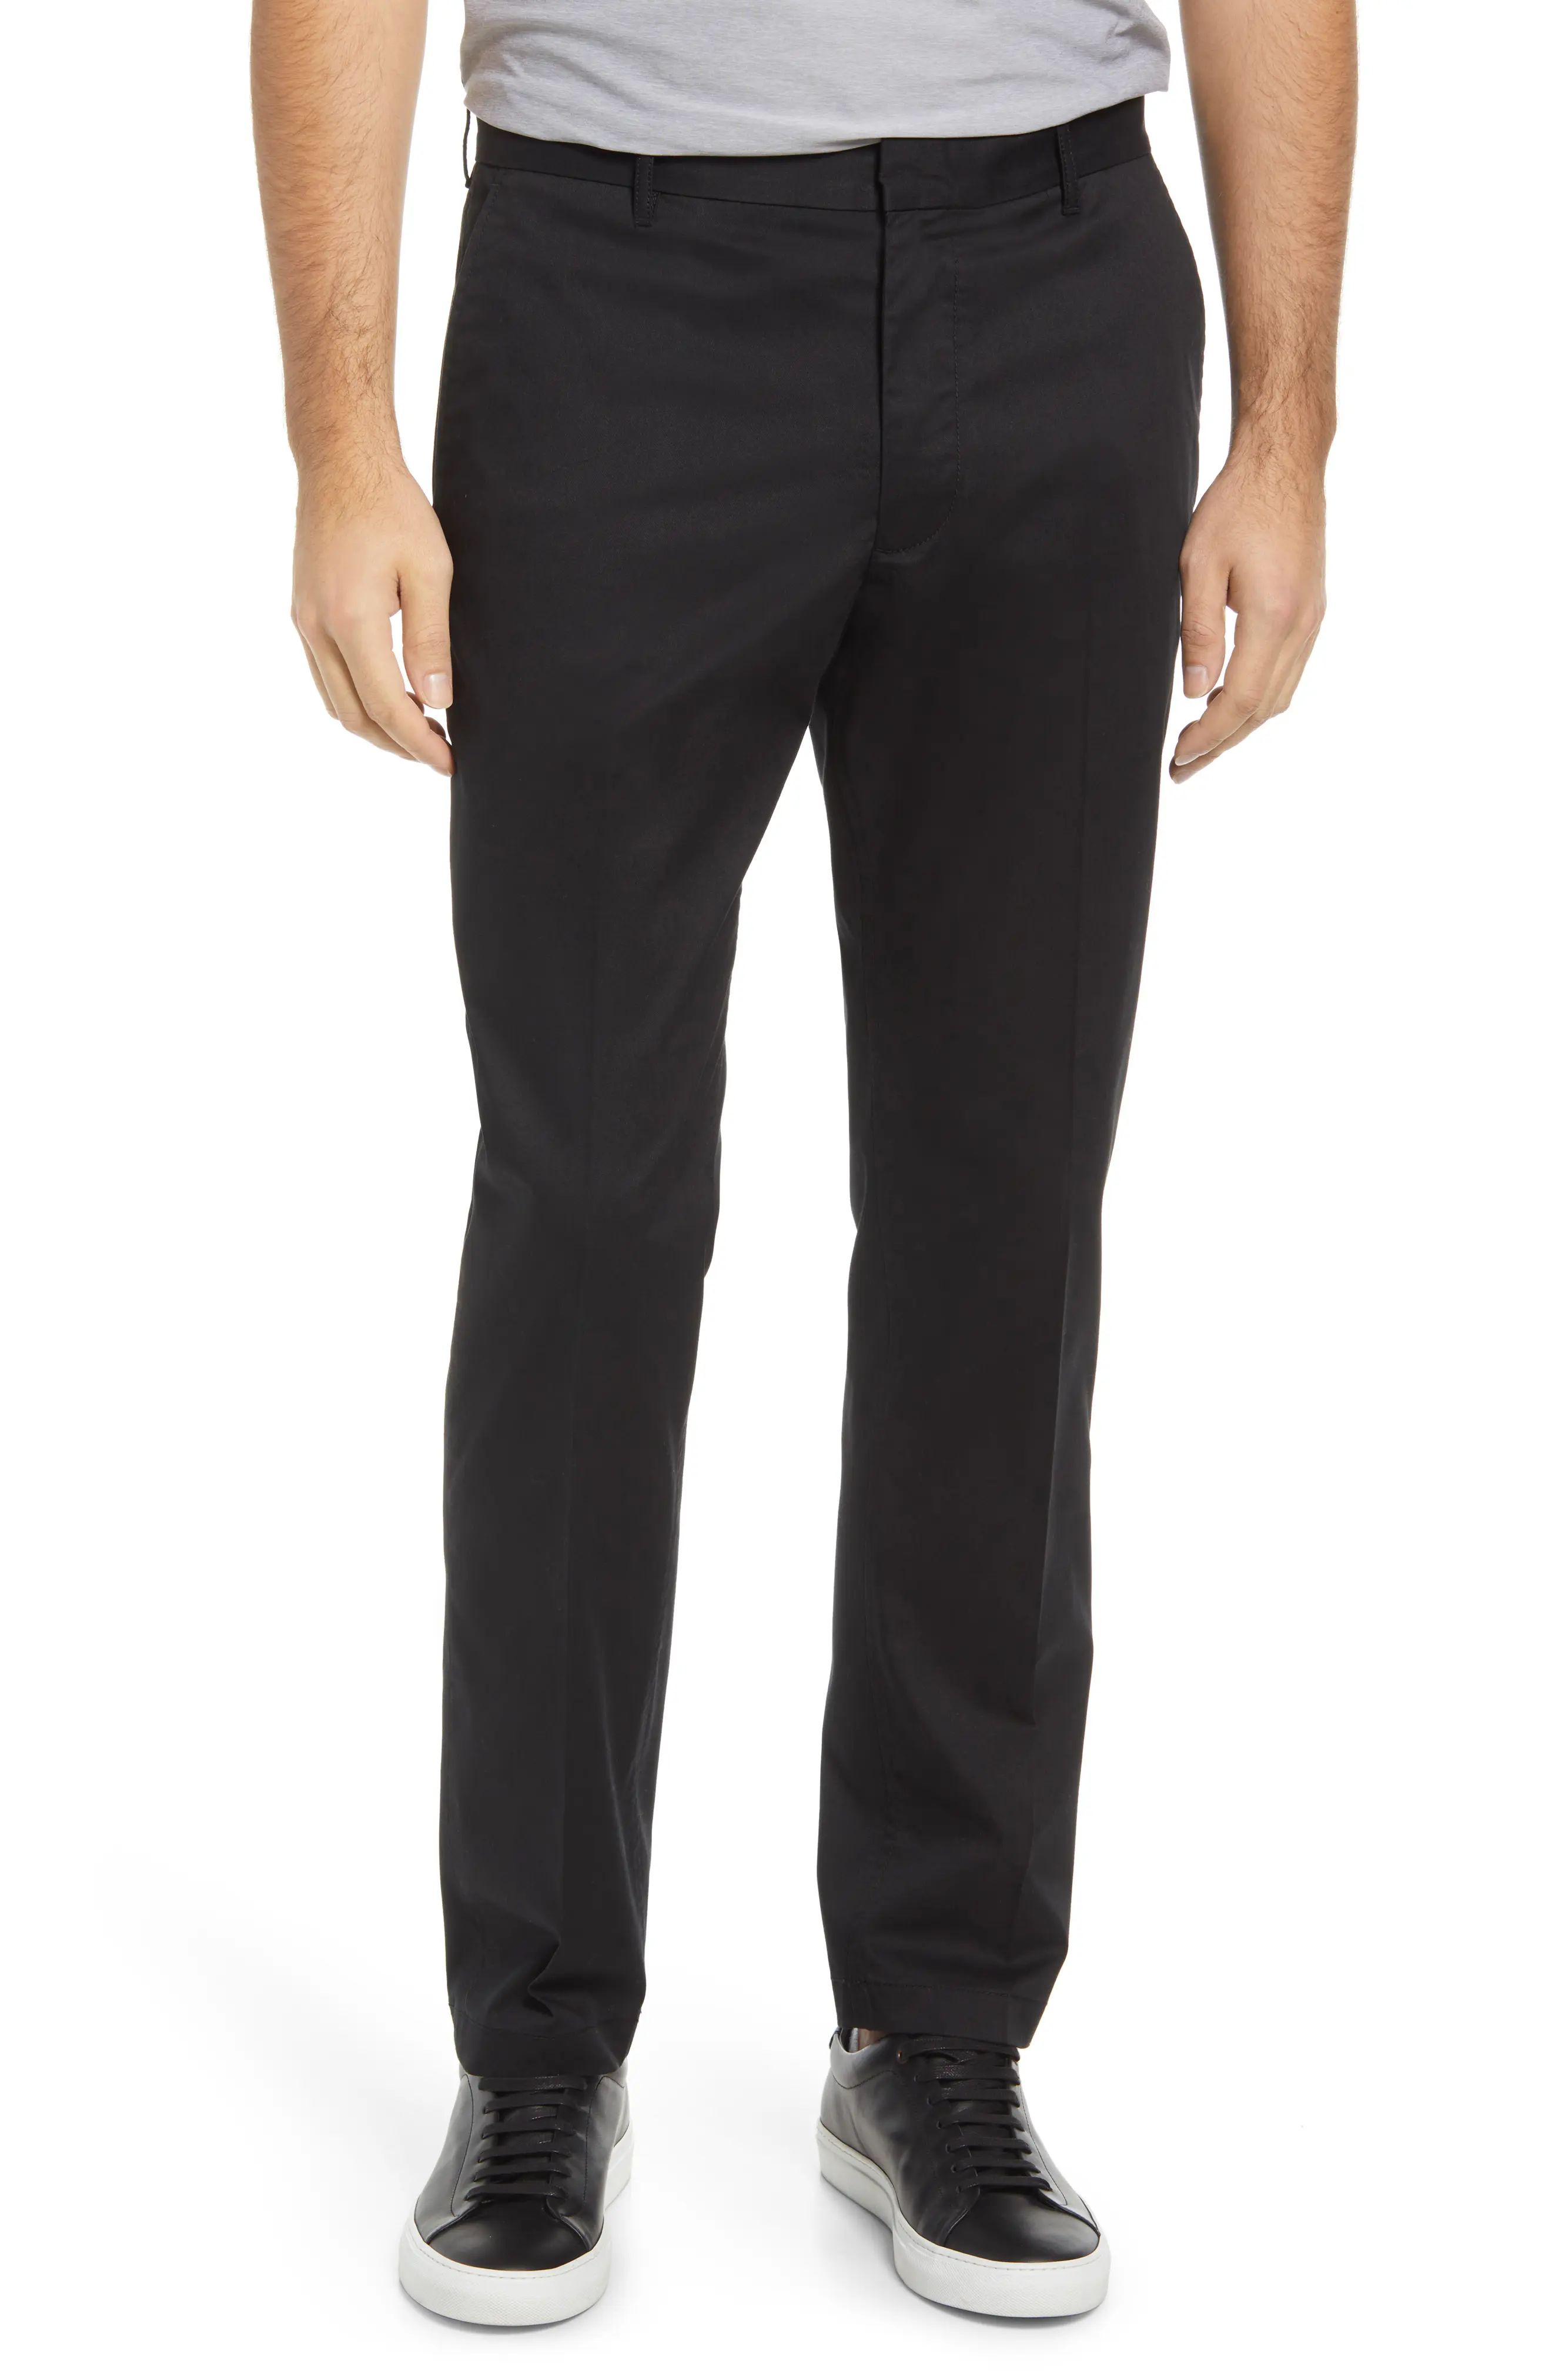 Nordstrom Athletic Fit CoolMax(R) Flat Front Performance Chino Pants in Black at Nordstrom, Size 28  | Nordstrom